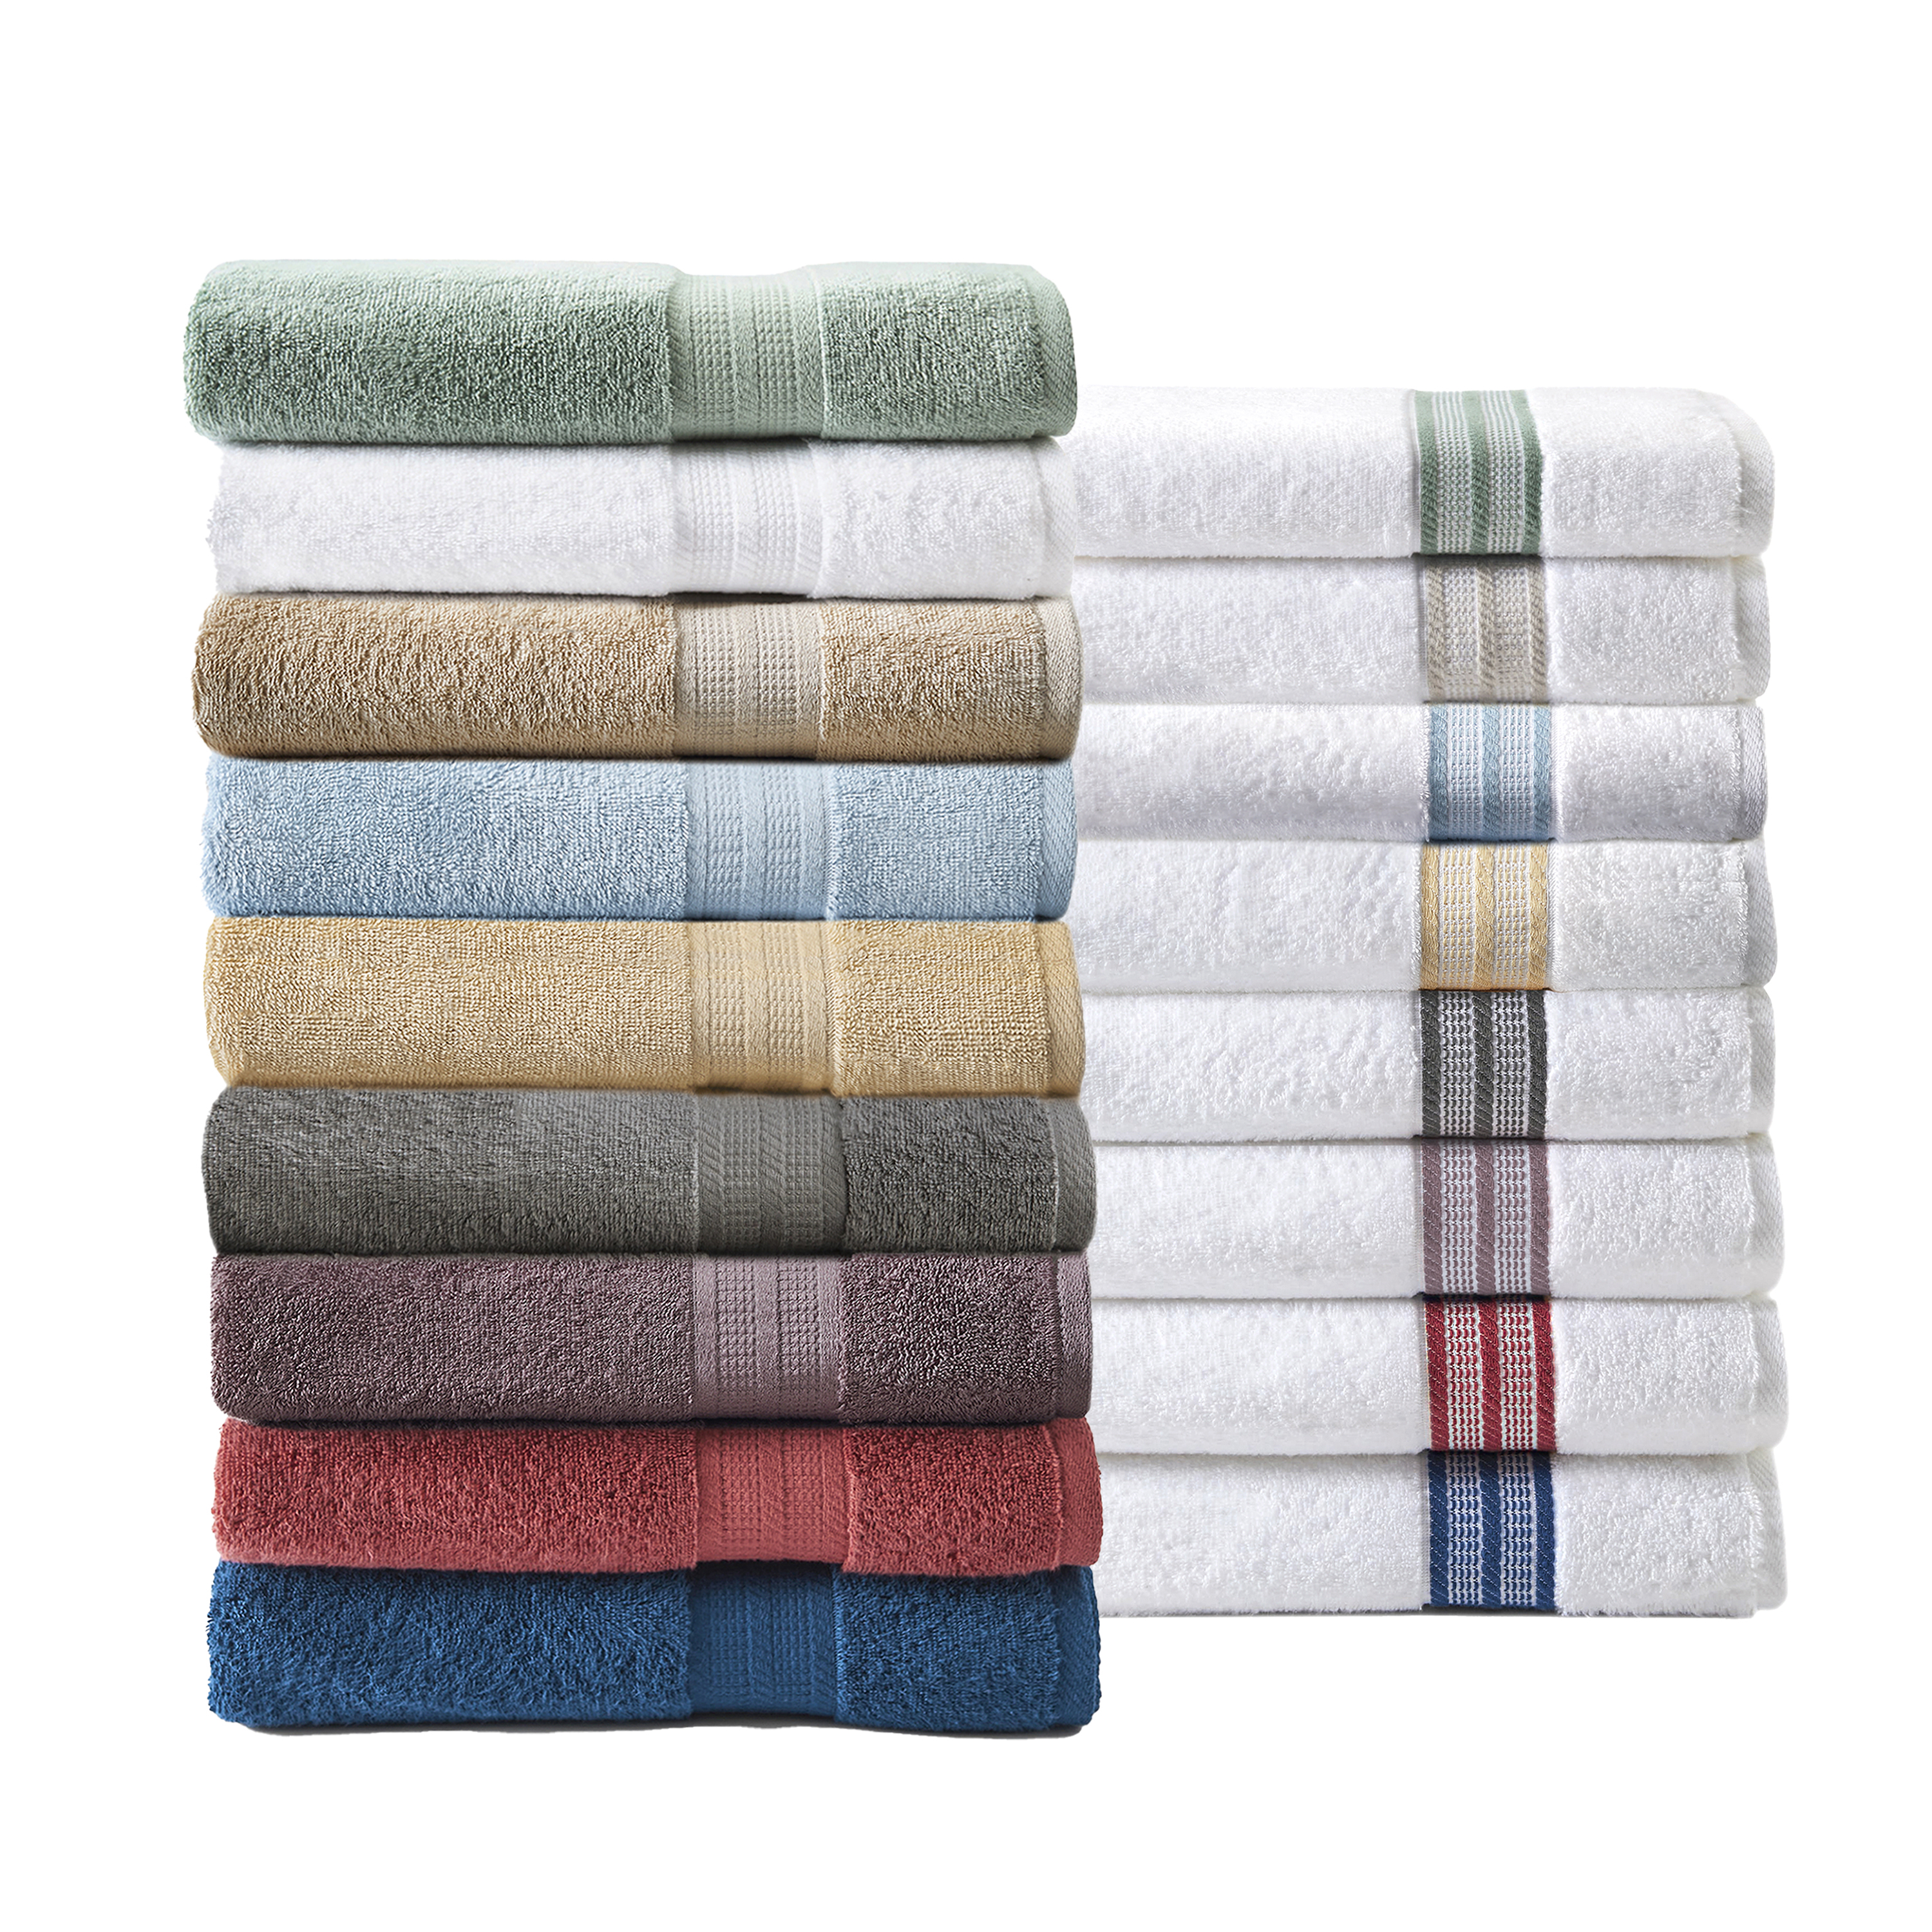 Better Homes & Gardens Adult Bath Towel, Solid Blue - image 2 of 7